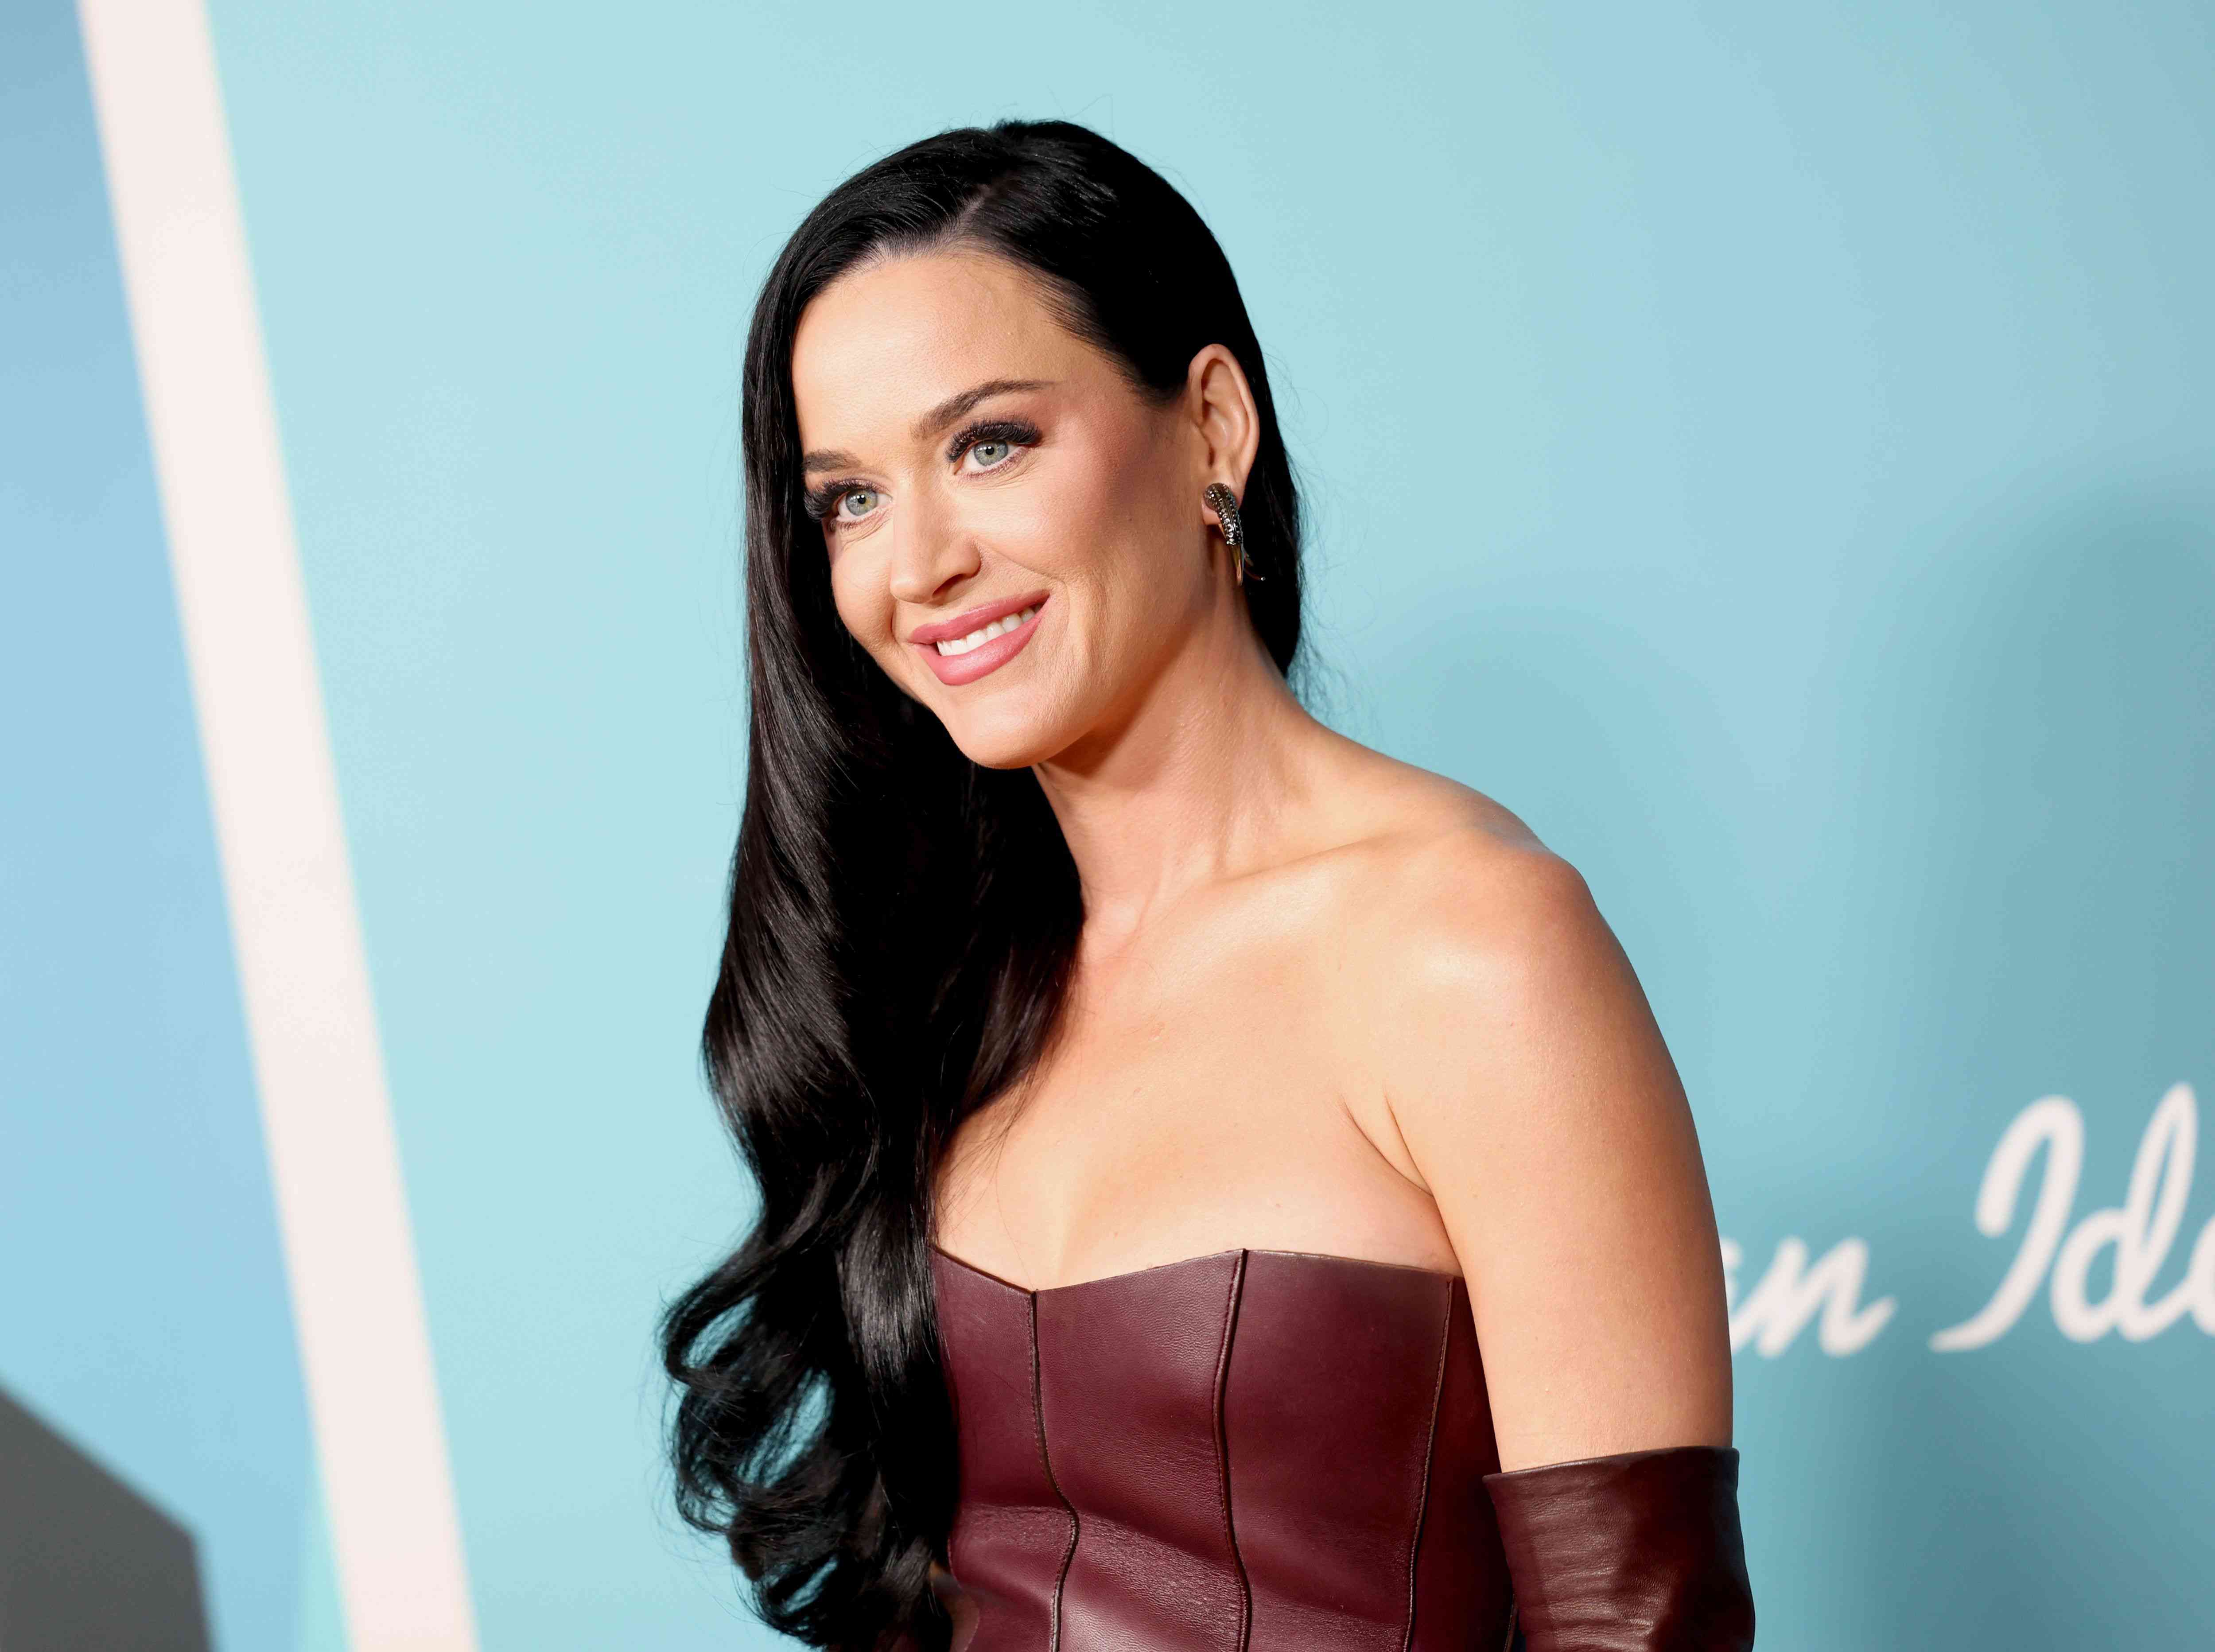 Katy Perry Does Not Want Her Daughter Daisy to Call Her By Her Stage Name